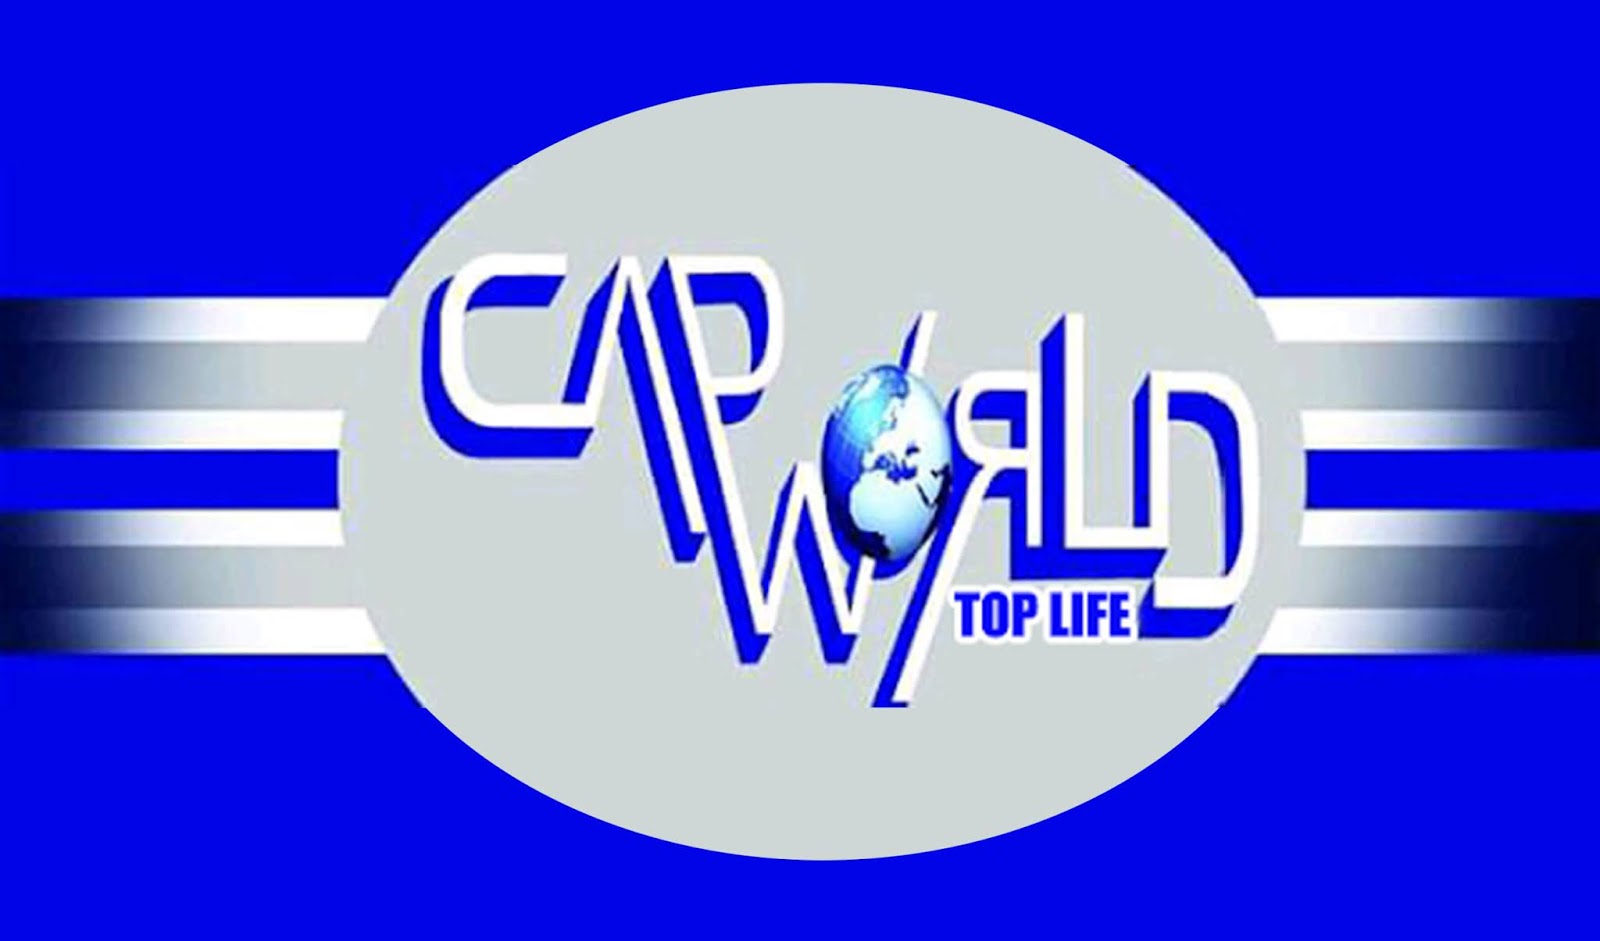 Get your Business or Brand in Front of the Right Audience | Paid Ads | PR | CAP WORLD Top Life 